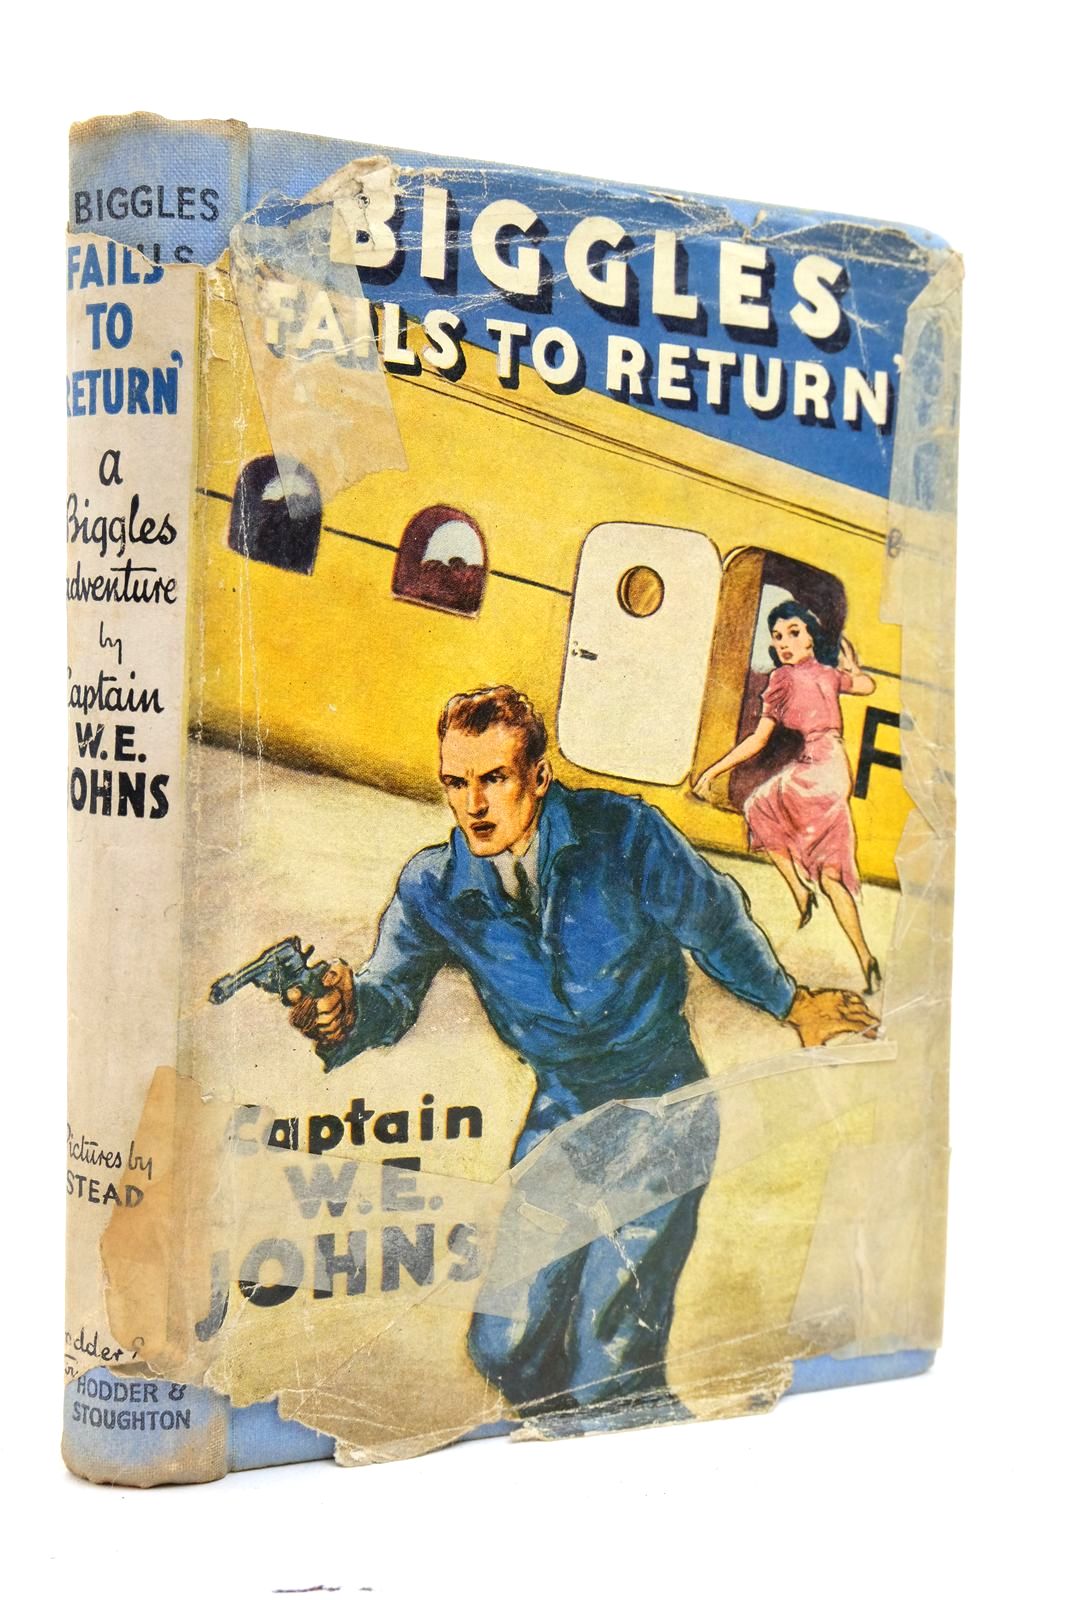 Photo of BIGGLES FAILS TO RETURN written by Johns, W.E. illustrated by Stead,  published by Hodder &amp; Stoughton (STOCK CODE: 2139739)  for sale by Stella & Rose's Books